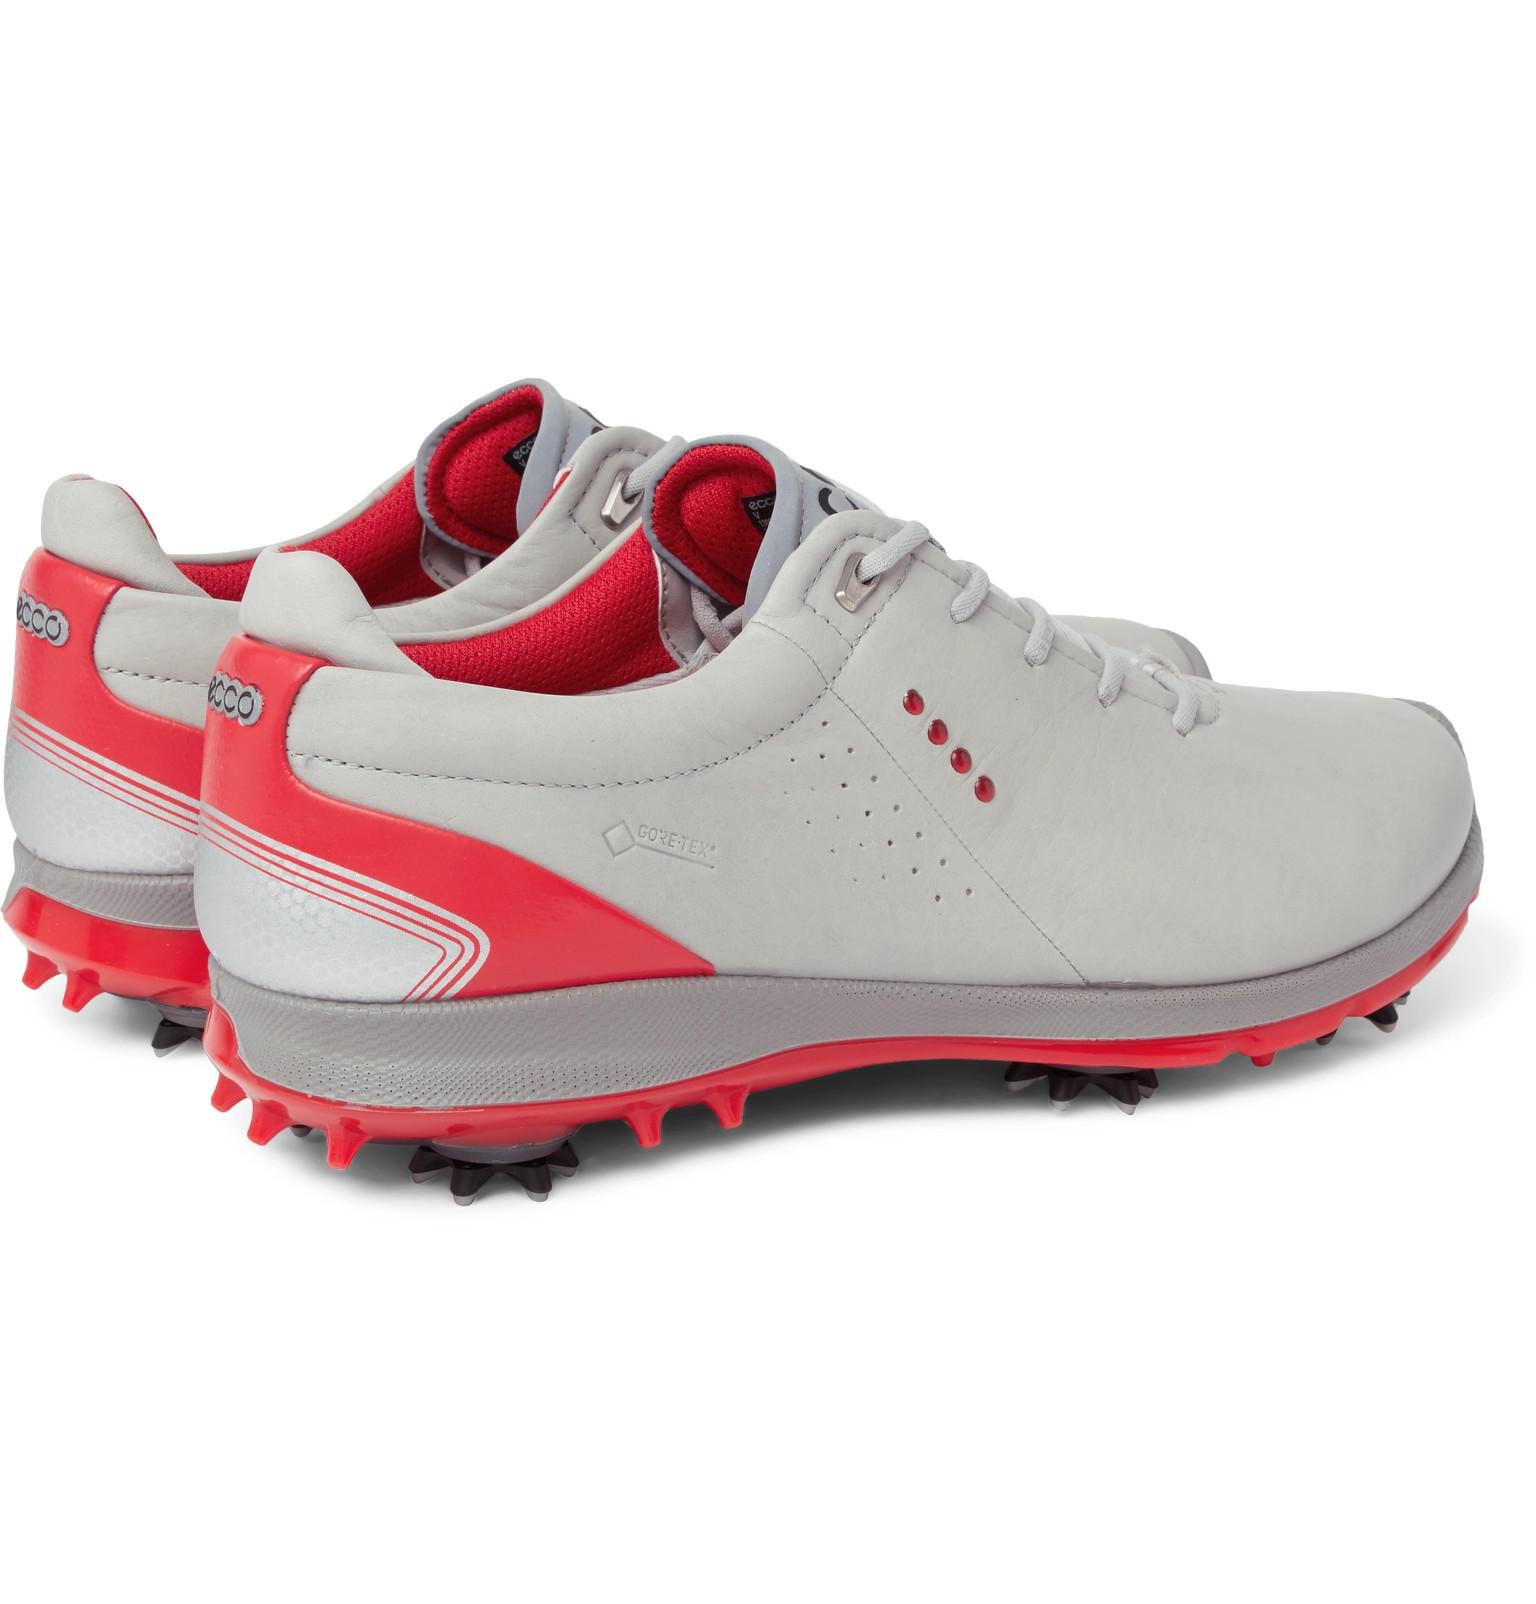 Ecco Biom G2 Leather Golf Shoes in Light Gray (Grey) for Men - Lyst